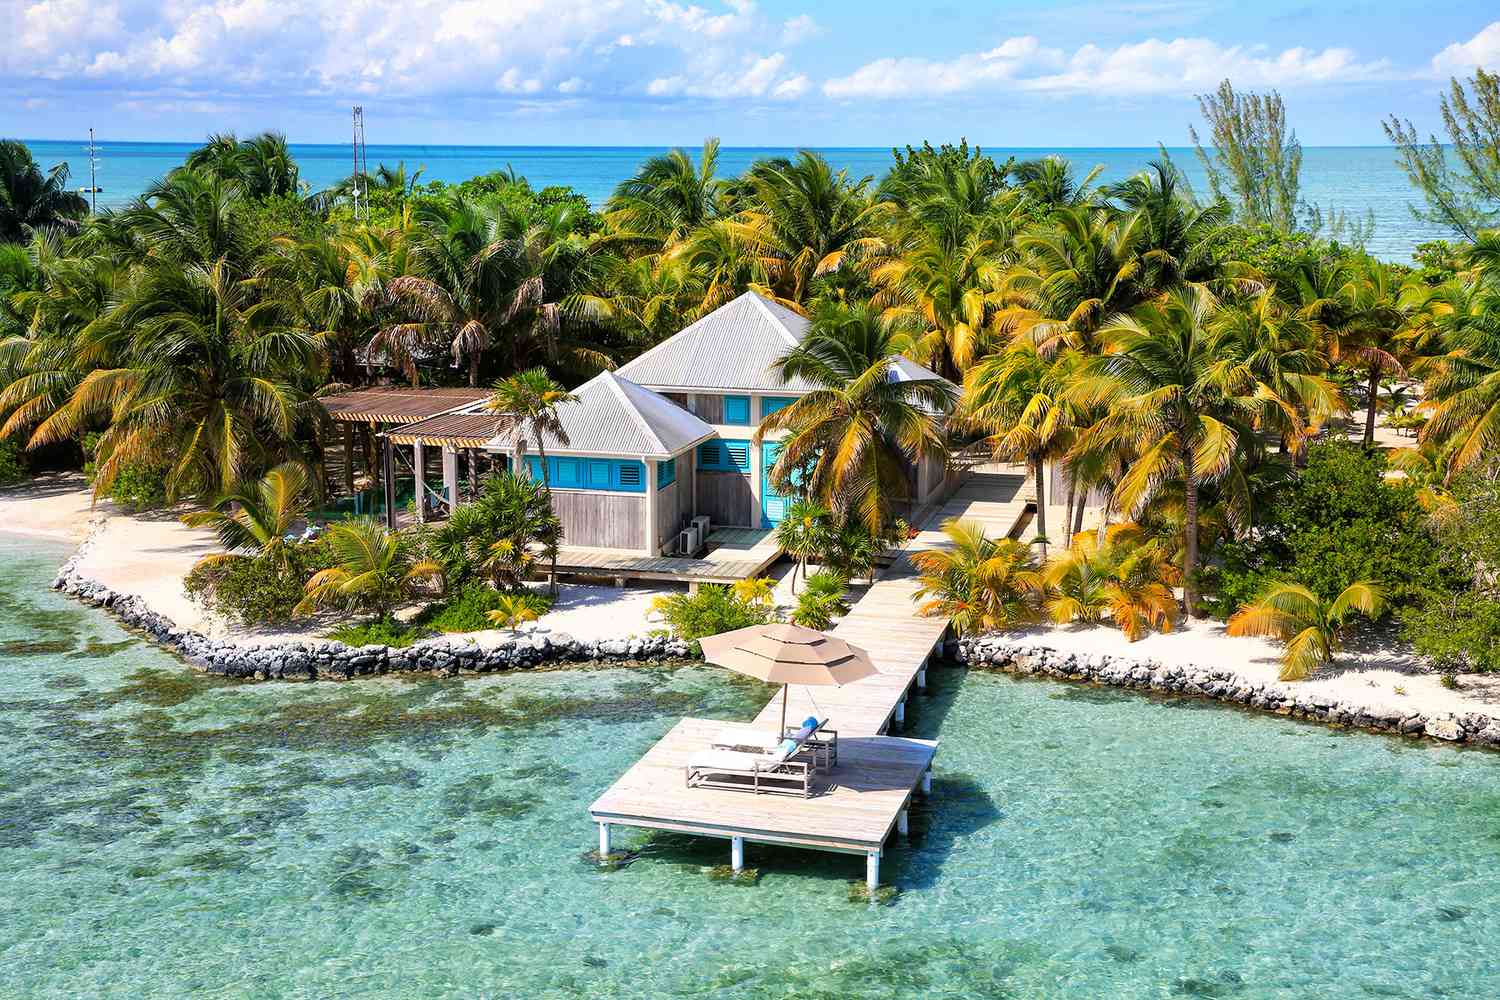 11 All-inclusive Resorts in Belize for Your Next Tropical Getaway